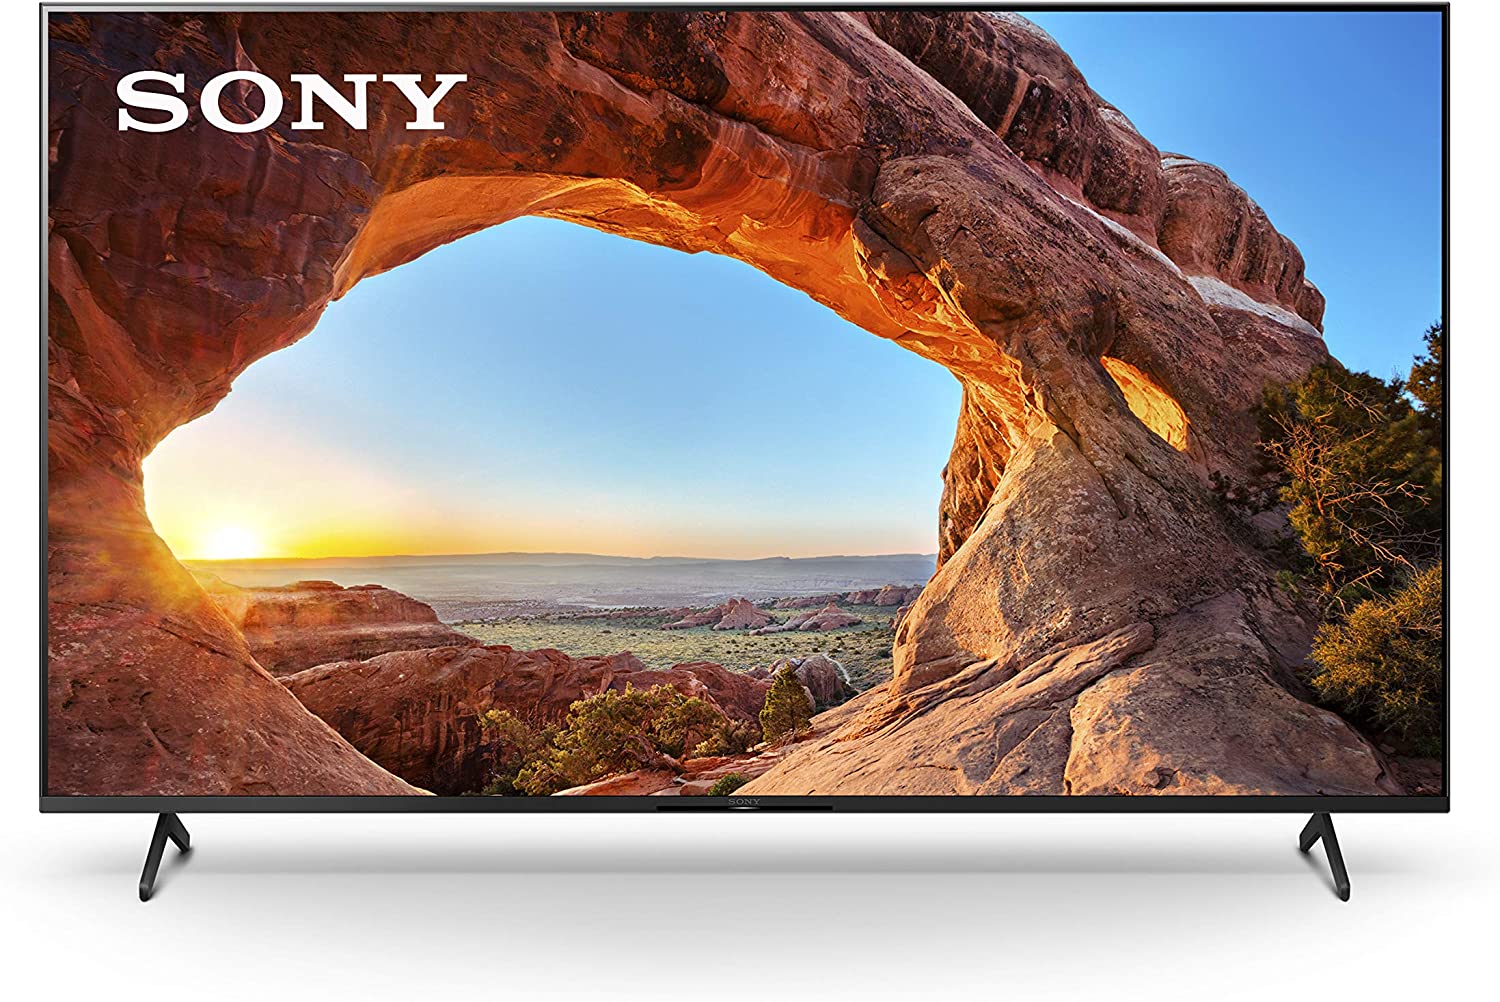 Sony X85J 65 Inch TV- 4K Ultra HD LED Smart Google TV with Native 120HZ Refresh Rate, Dolby Vision HDR, and Alexa Compatibility